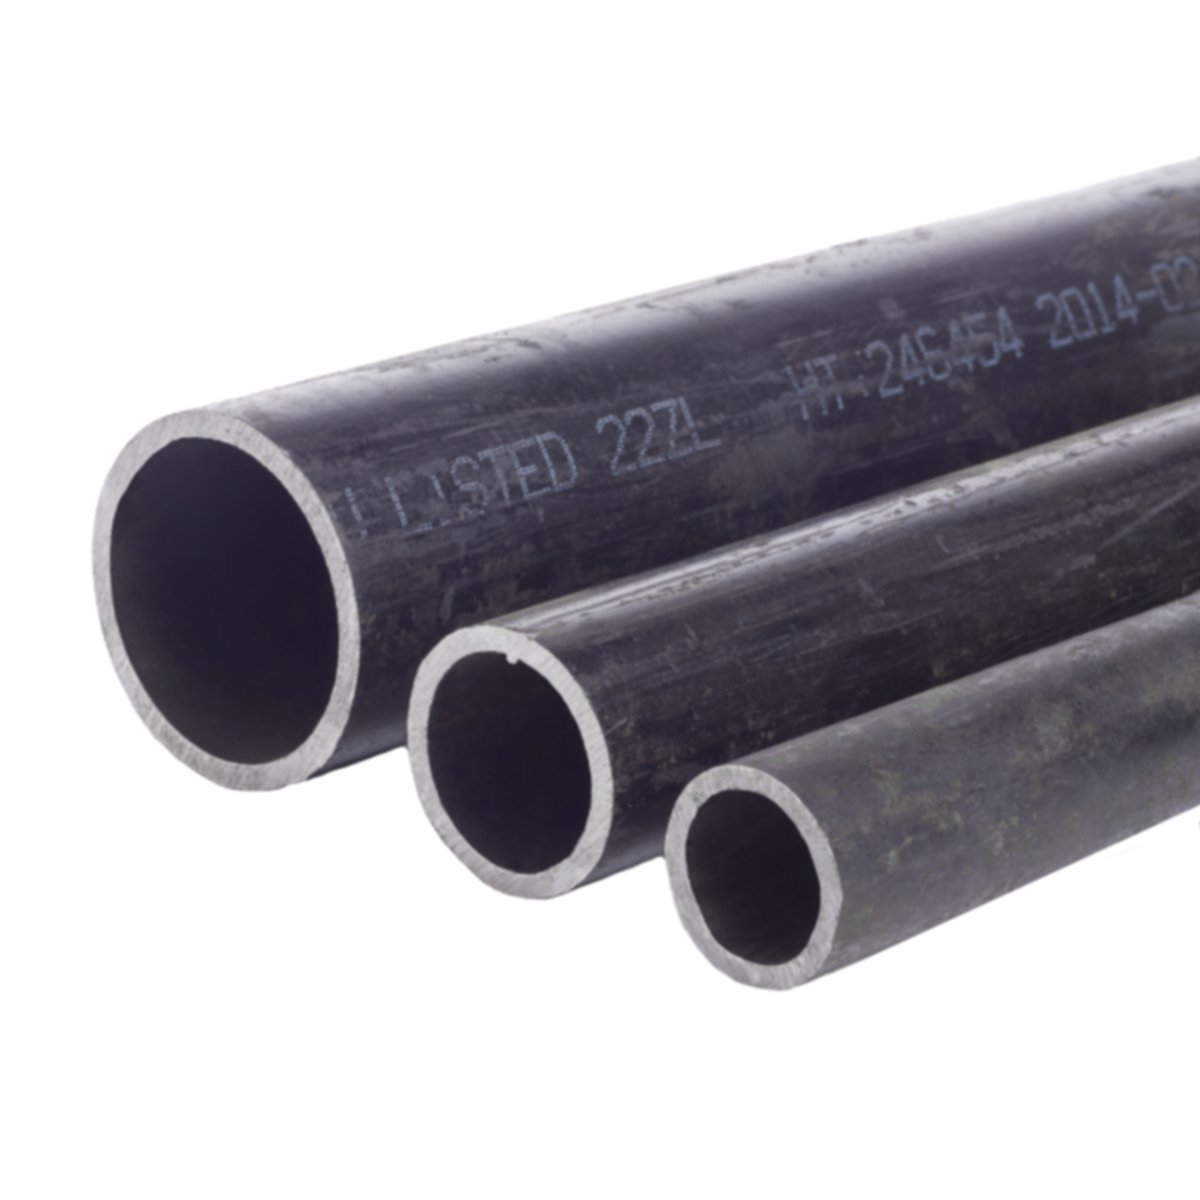 Metal Cylinders, 1/2 inch x 2 inches (about 50 mm x 13 mm), Set of 6 